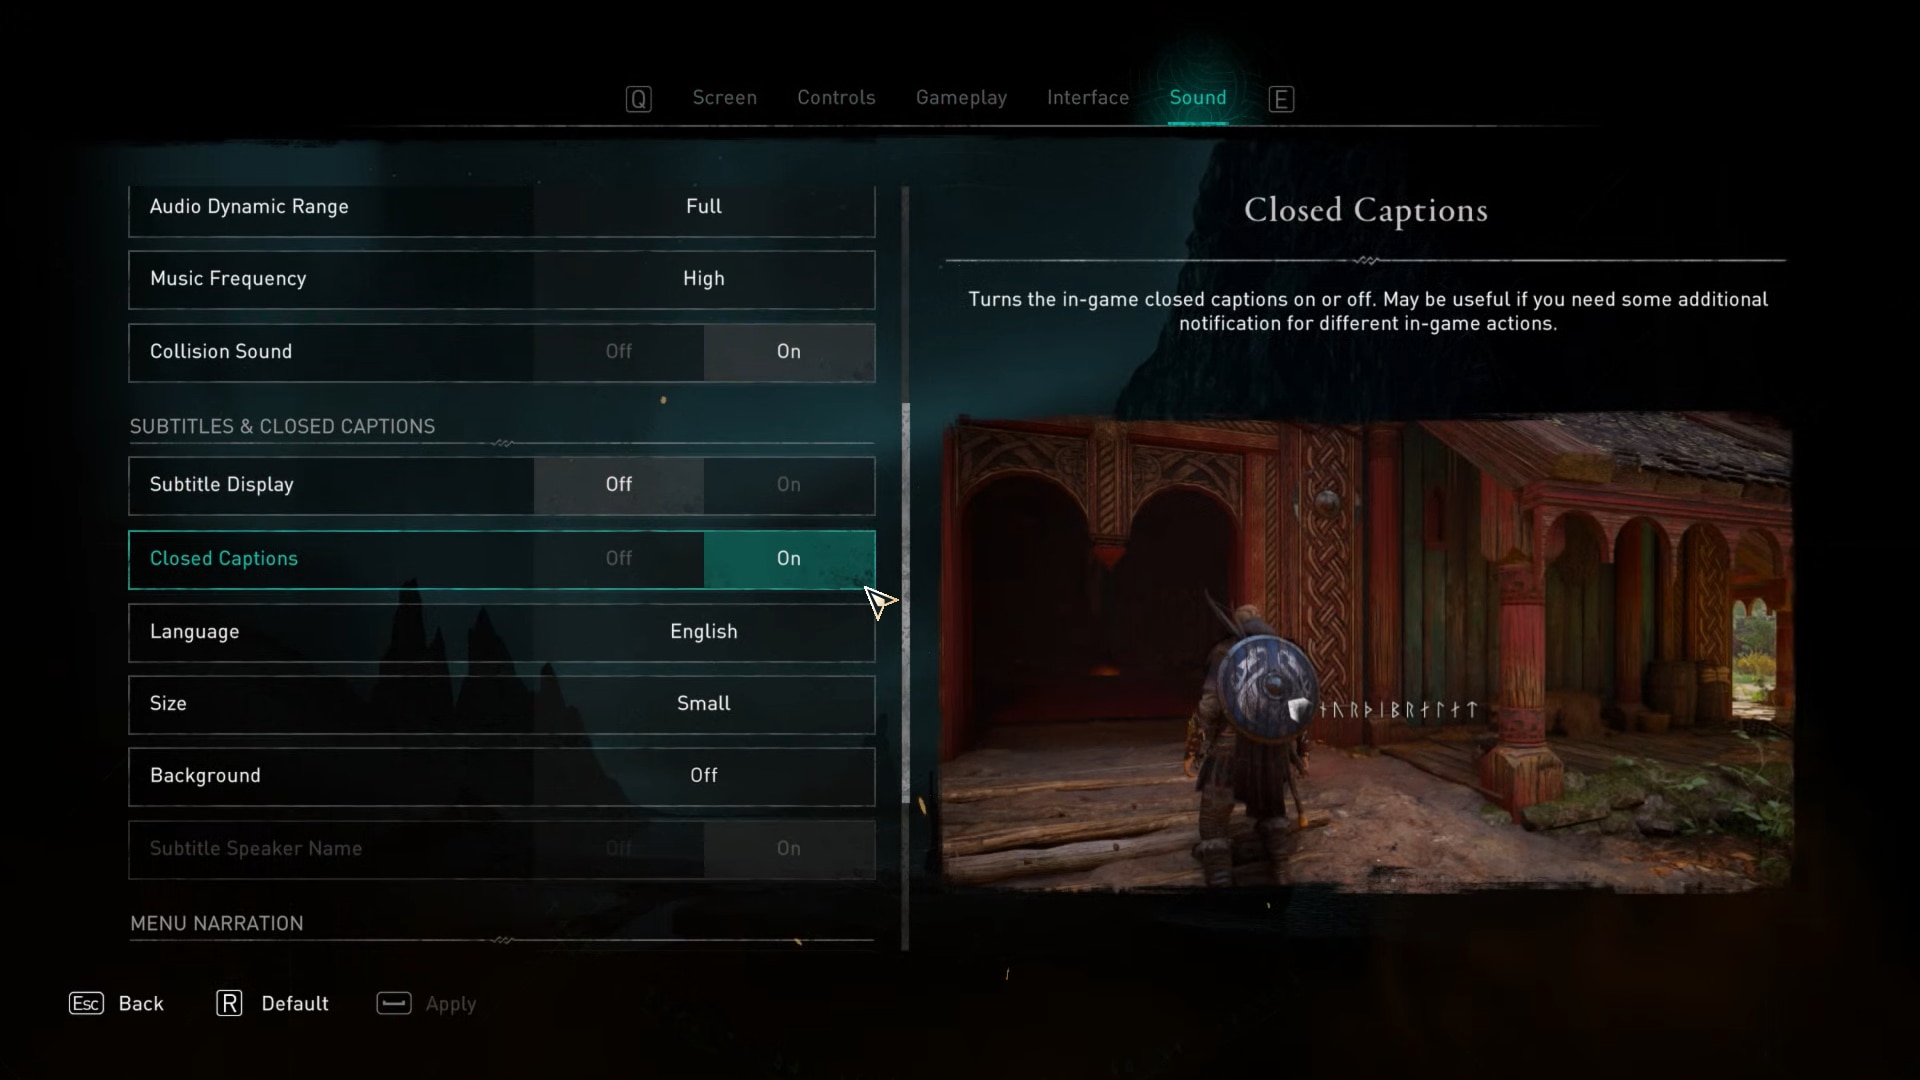 Changing the language of subtitles in Assassin's Creed Valhalla